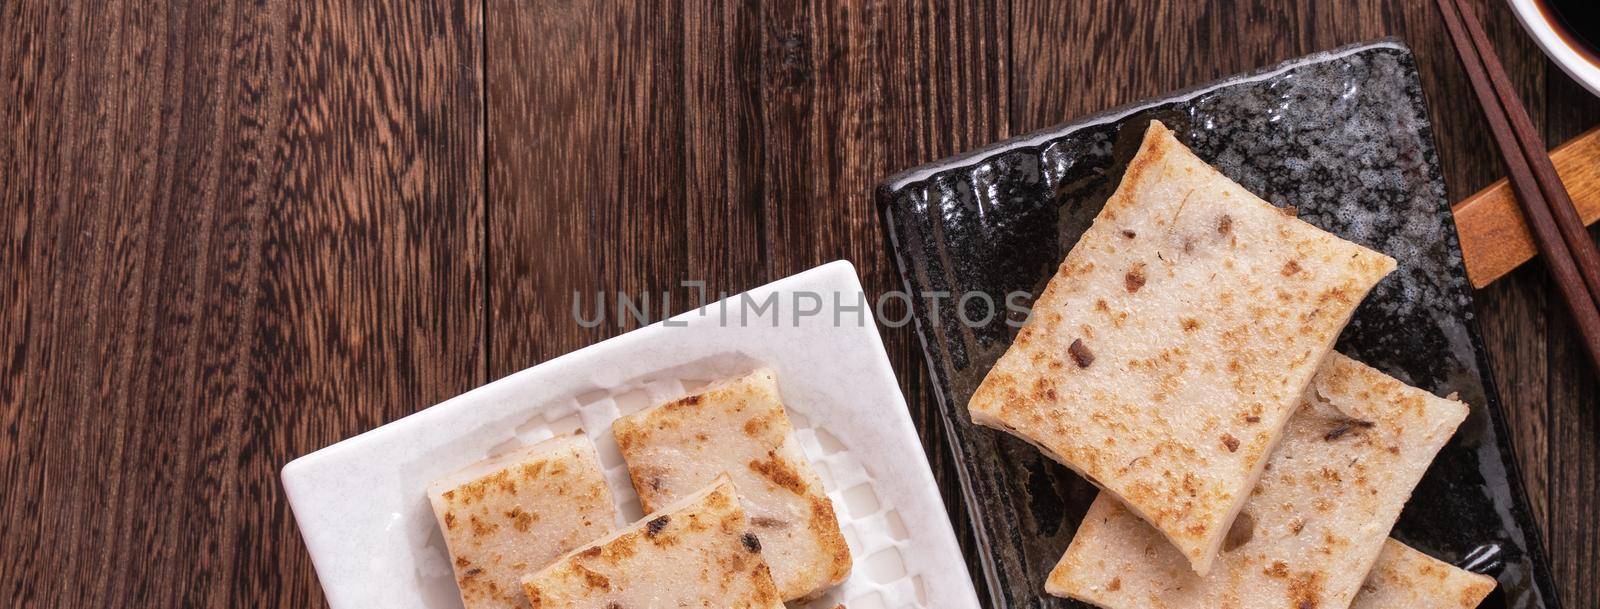 Delicious turnip cake, Chinese traditional local radish cake in restaurant with soy sauce and chopsticks, close up, copy space, top view, flat lay. by ROMIXIMAGE